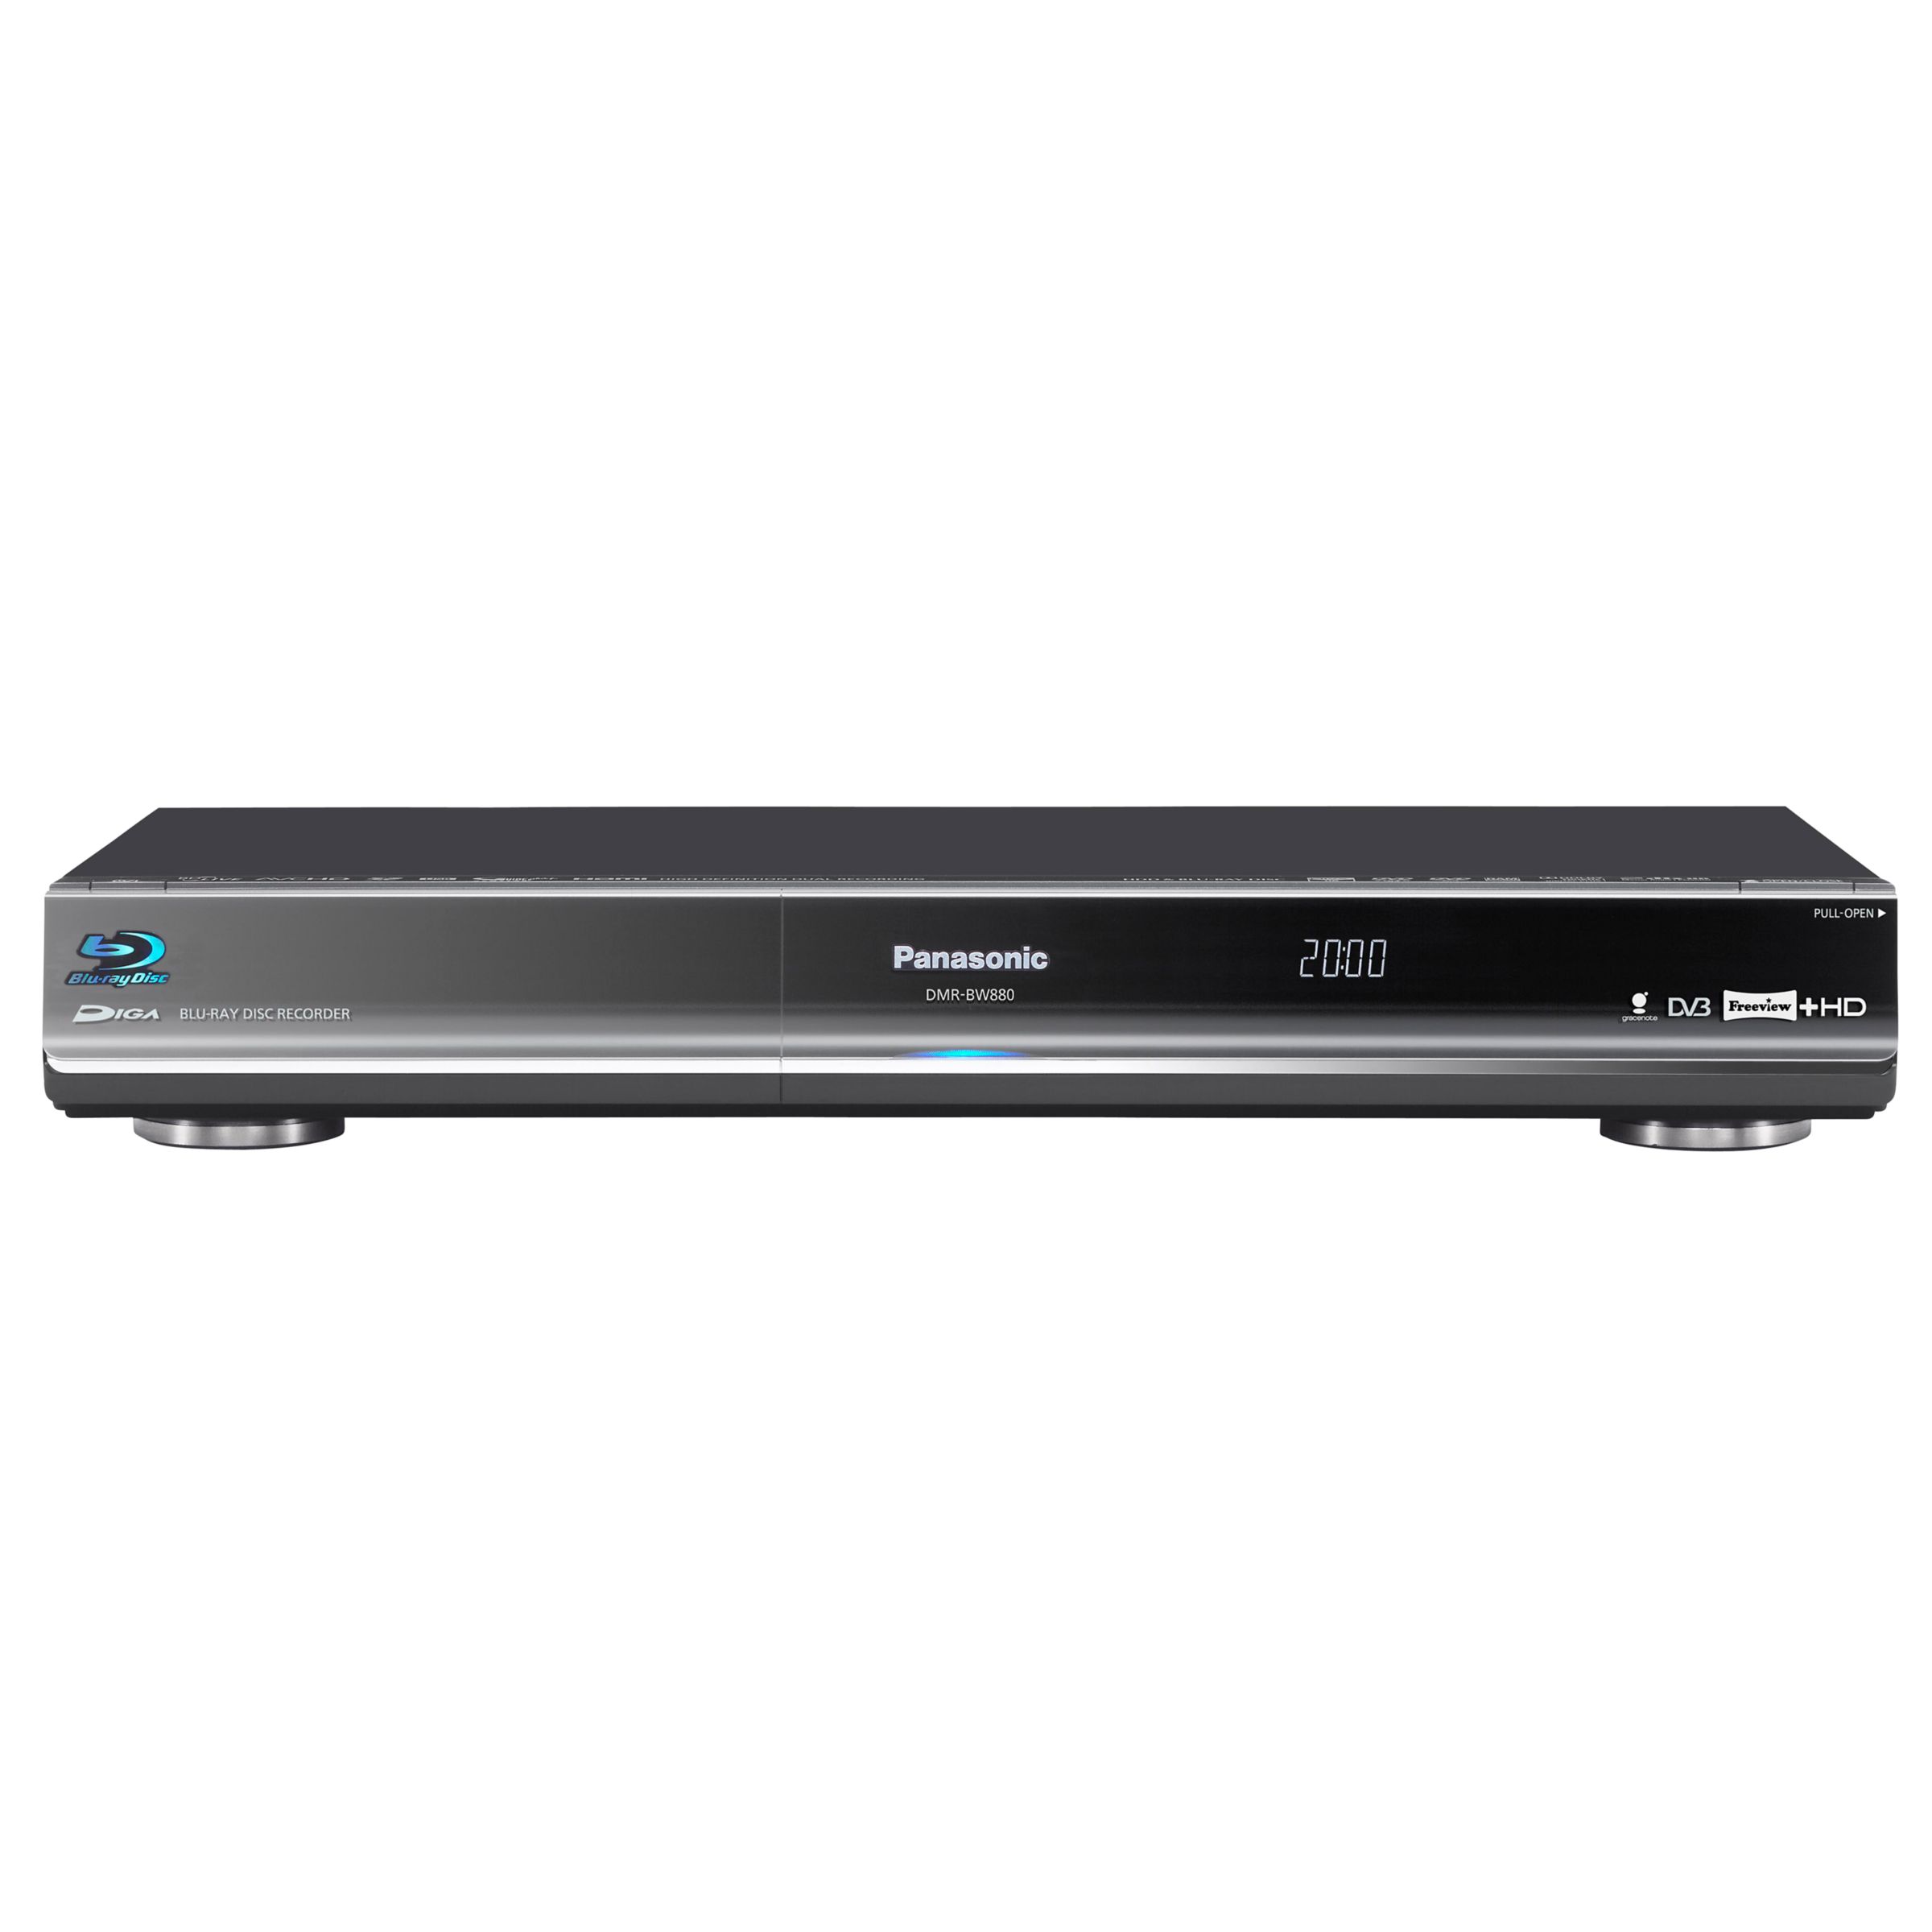 Panasonic DMR-BW880 Blu-ray/DVD/HDD 500GB Digital Recorder with Built-in Freeview+ HD at John Lewis